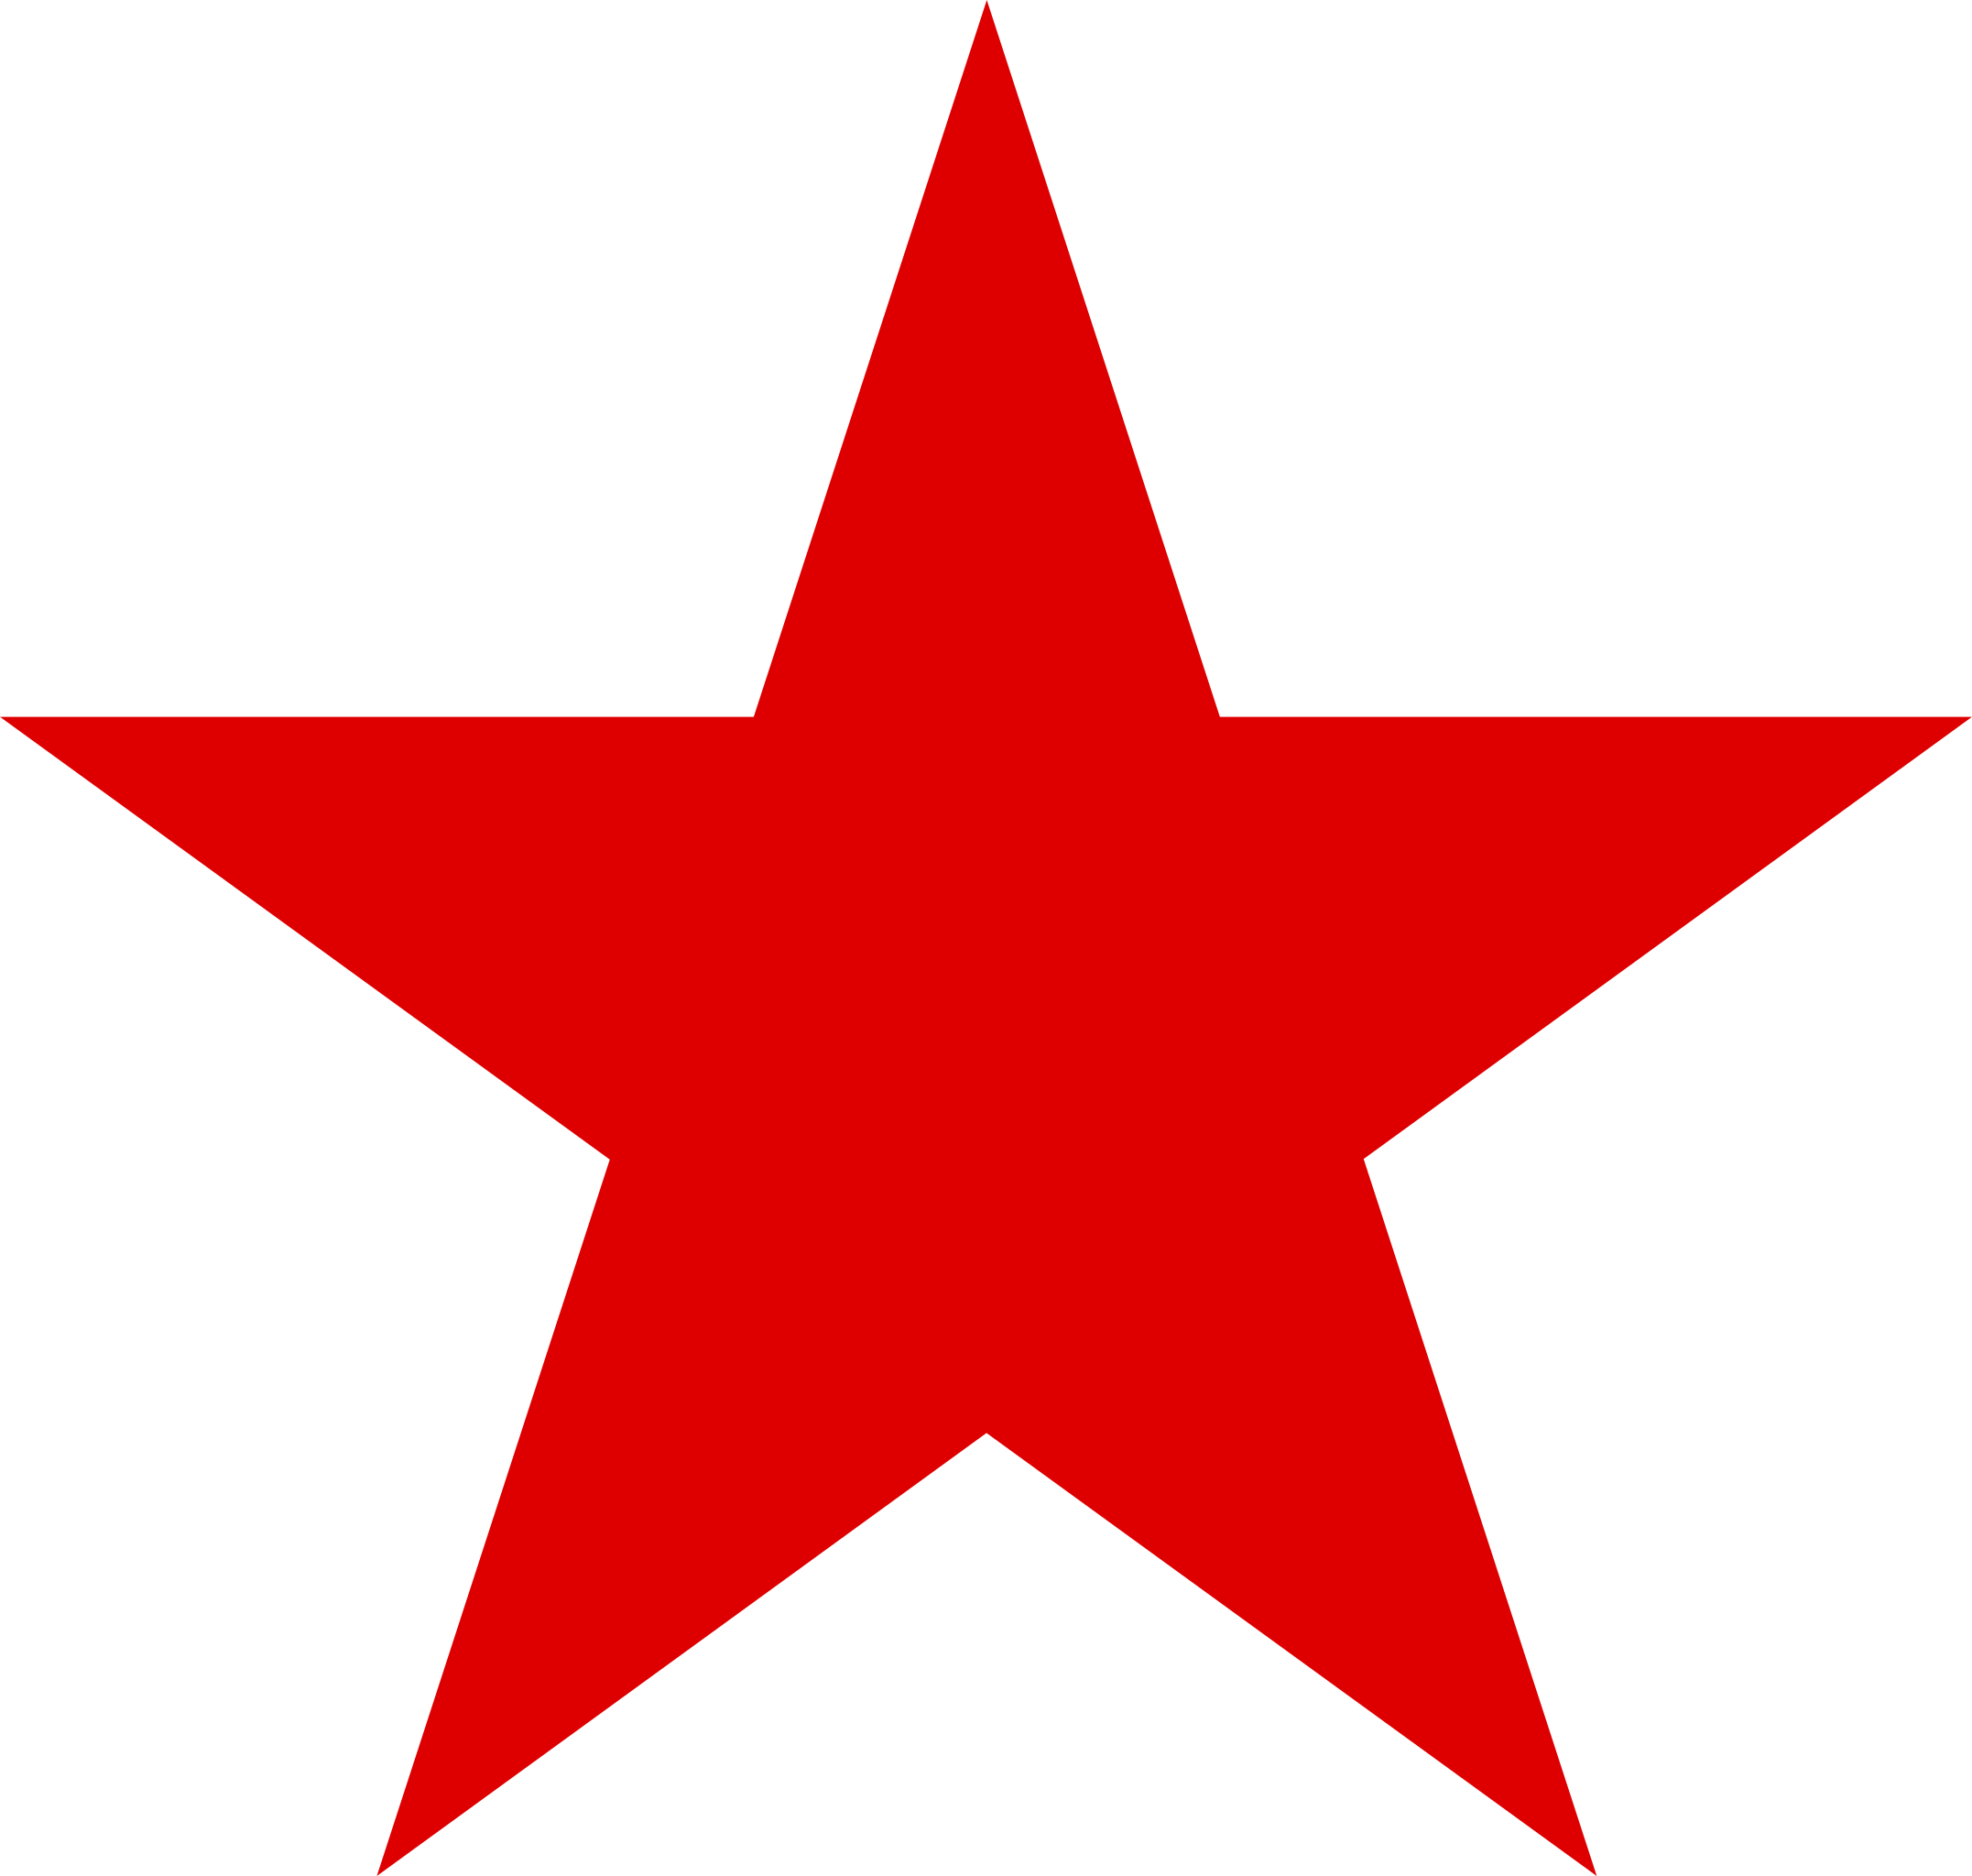 File:Red Star.png